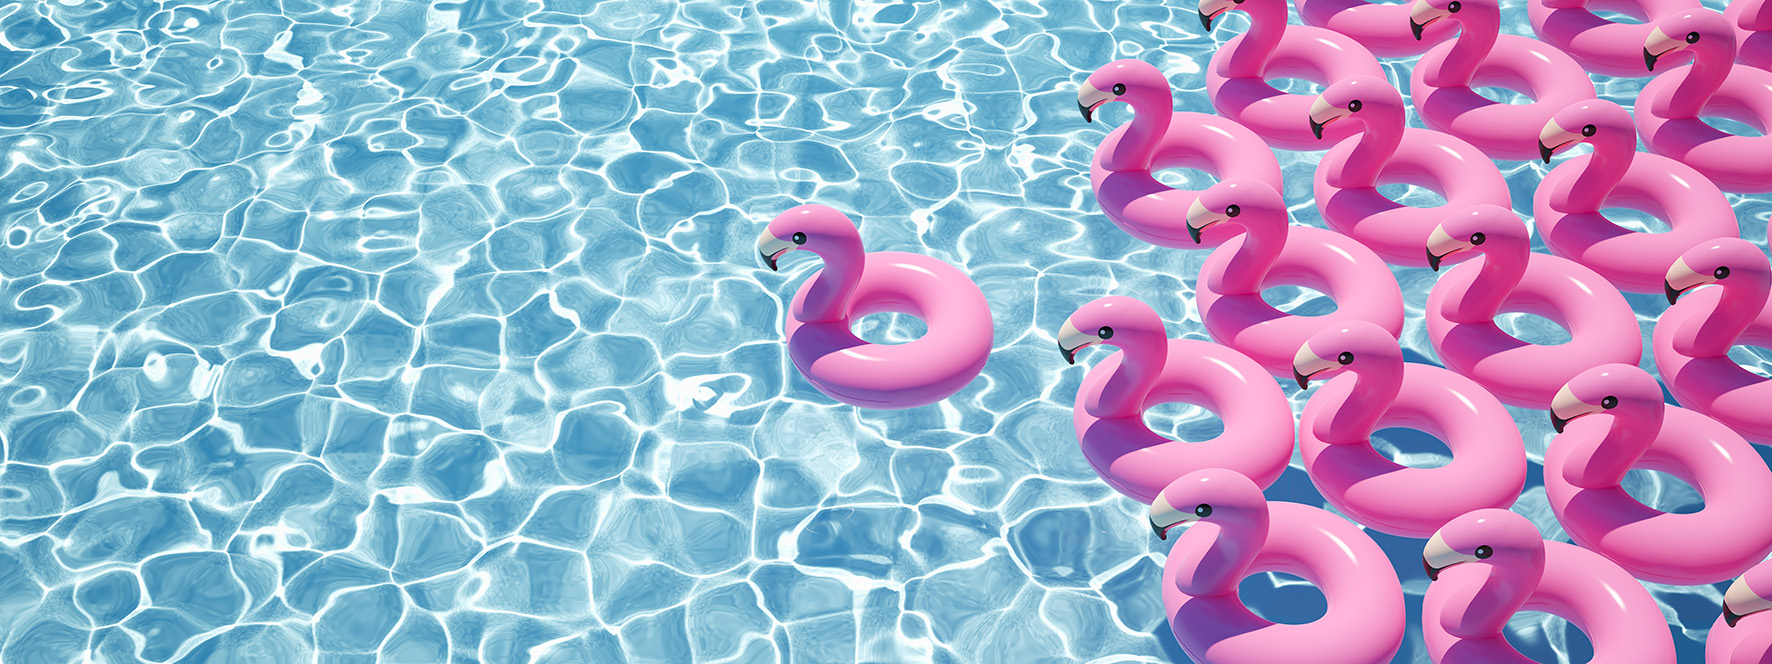 A,Lot,Of,Flamingo,Floats,In,A,Pool.,3d,Rendering